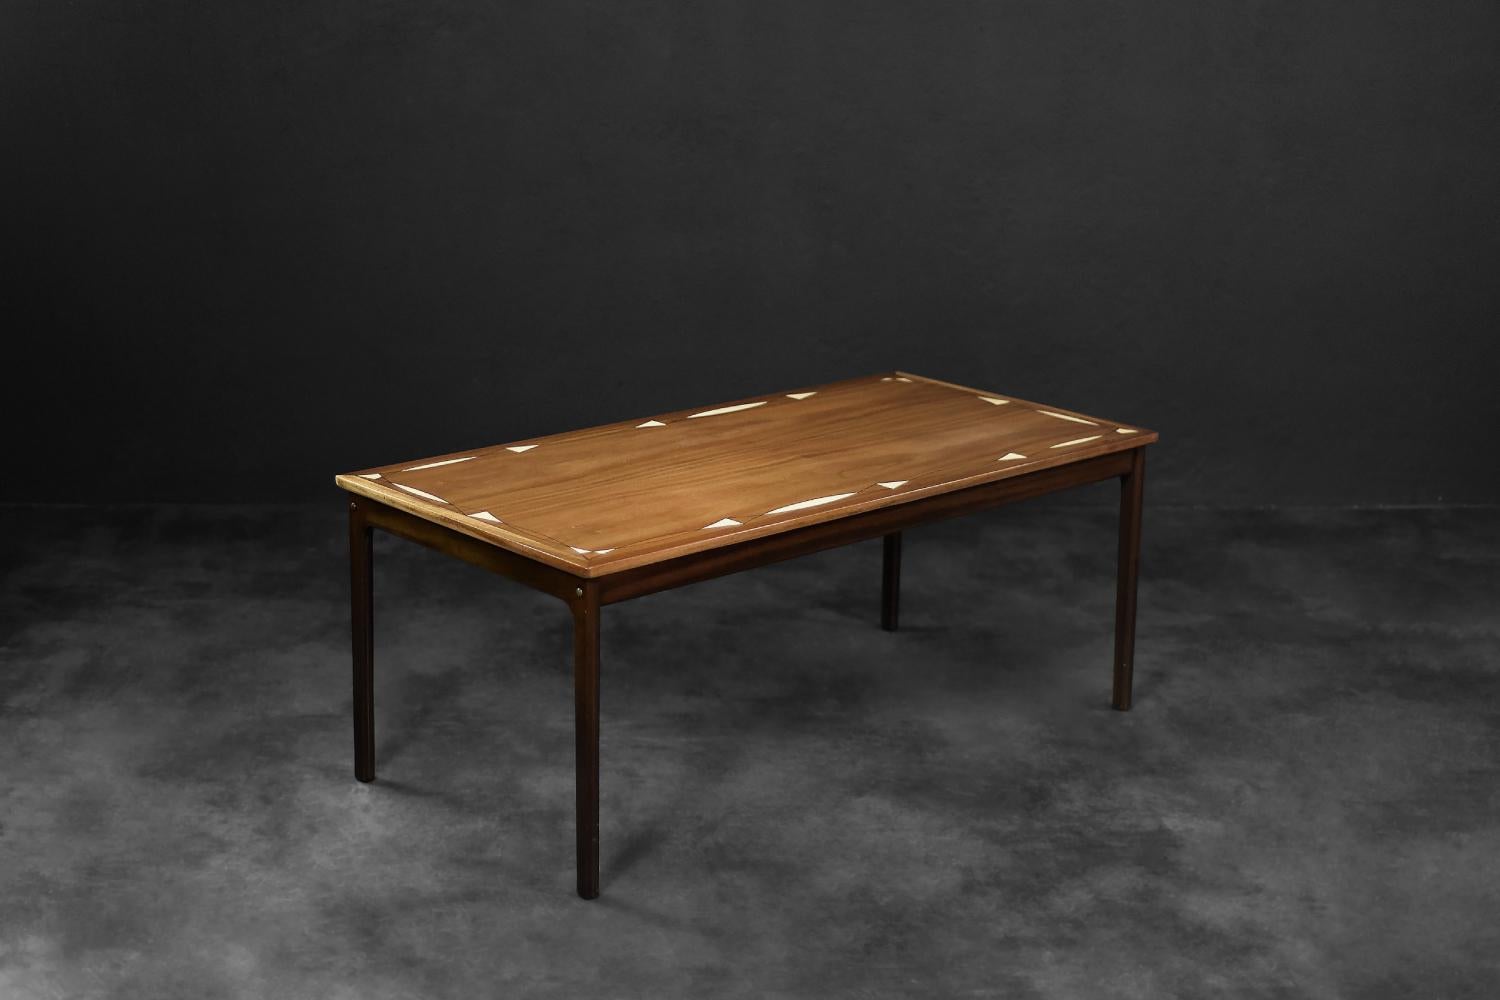 The base of this table is a design by Ole Wanscher for the Danish manufacturer PJ Møbler. It was made during the 1960s. It is made of high-quality dark mahogany with an interesting grain. The tabletop is decorated with hand-painted, artistic